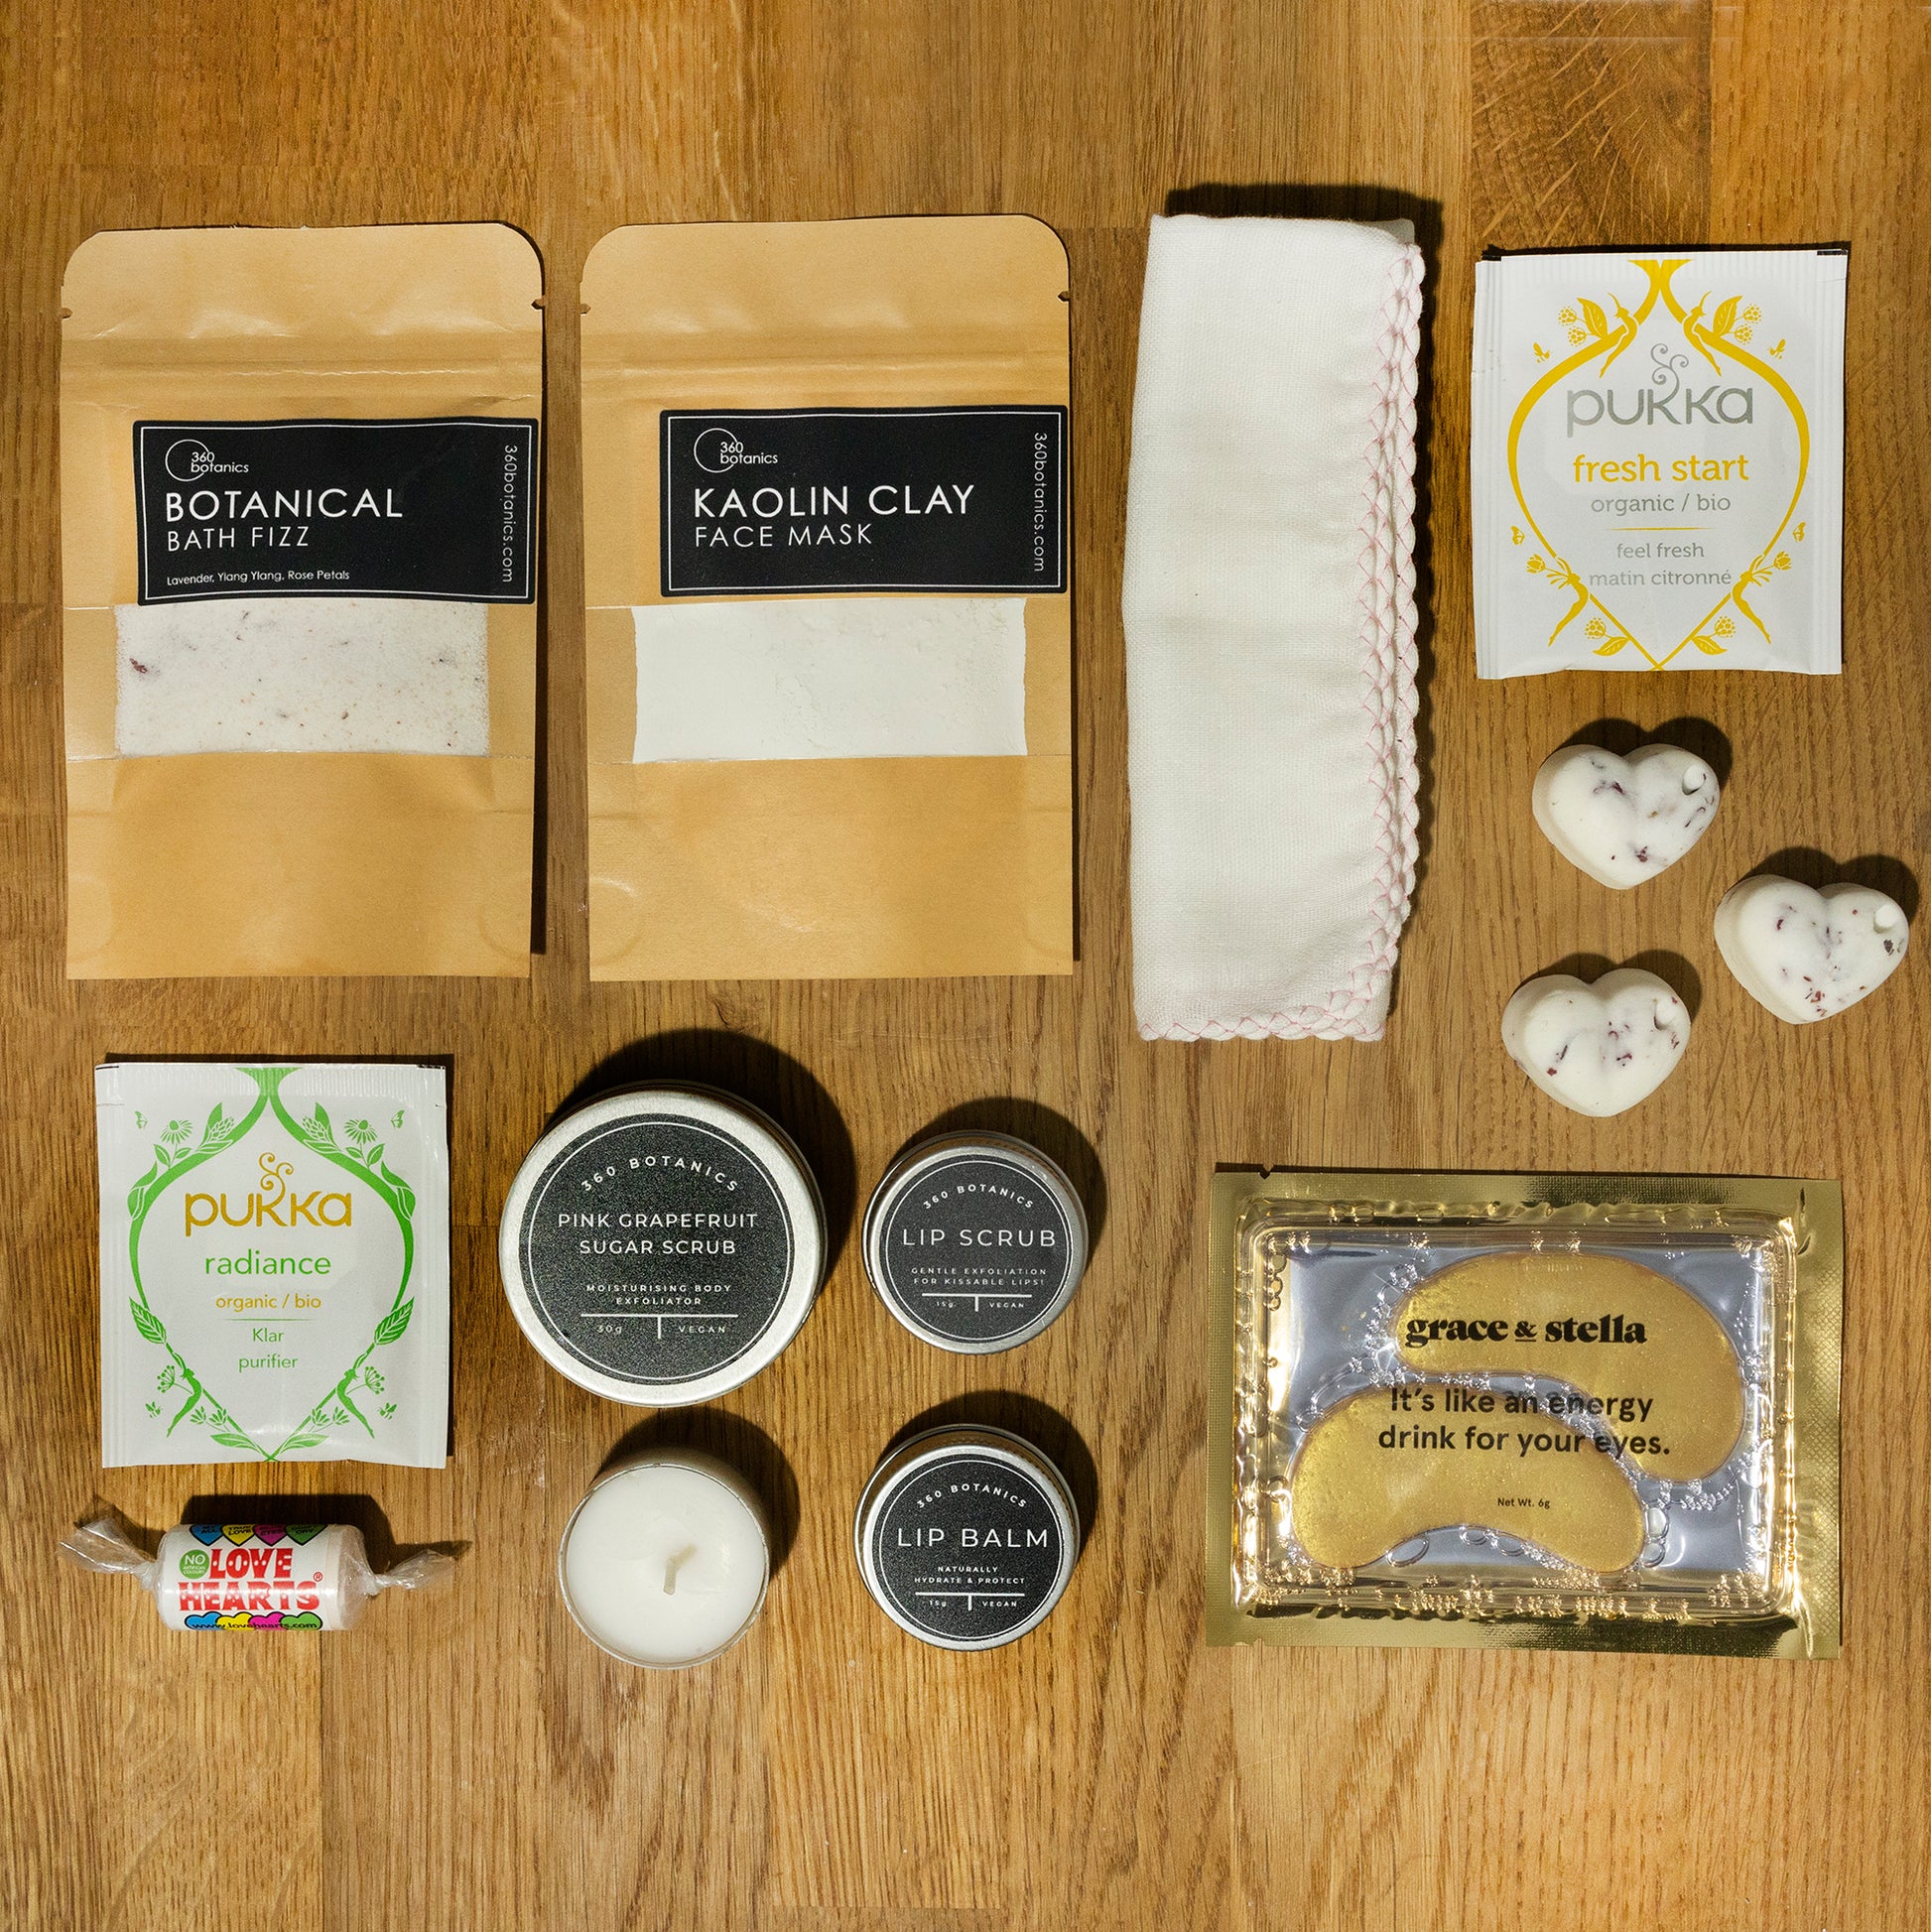 An array of self-care items neatly displayed on a wooden surface: two pouches labeled "Botanical Bath Fizz" and "Kaolin Clay Face Mask," a white washcloth, two Pukka tea packets in "fresh start" and "radiance" varieties, a tin of "Pink Grapefruit Sugar Scrub," two round containers labeled "Lip Scrub" and "Lip Balm," a small white candle, heart-shaped bath bombs, and a "Grace & Stella" eye mask packet.